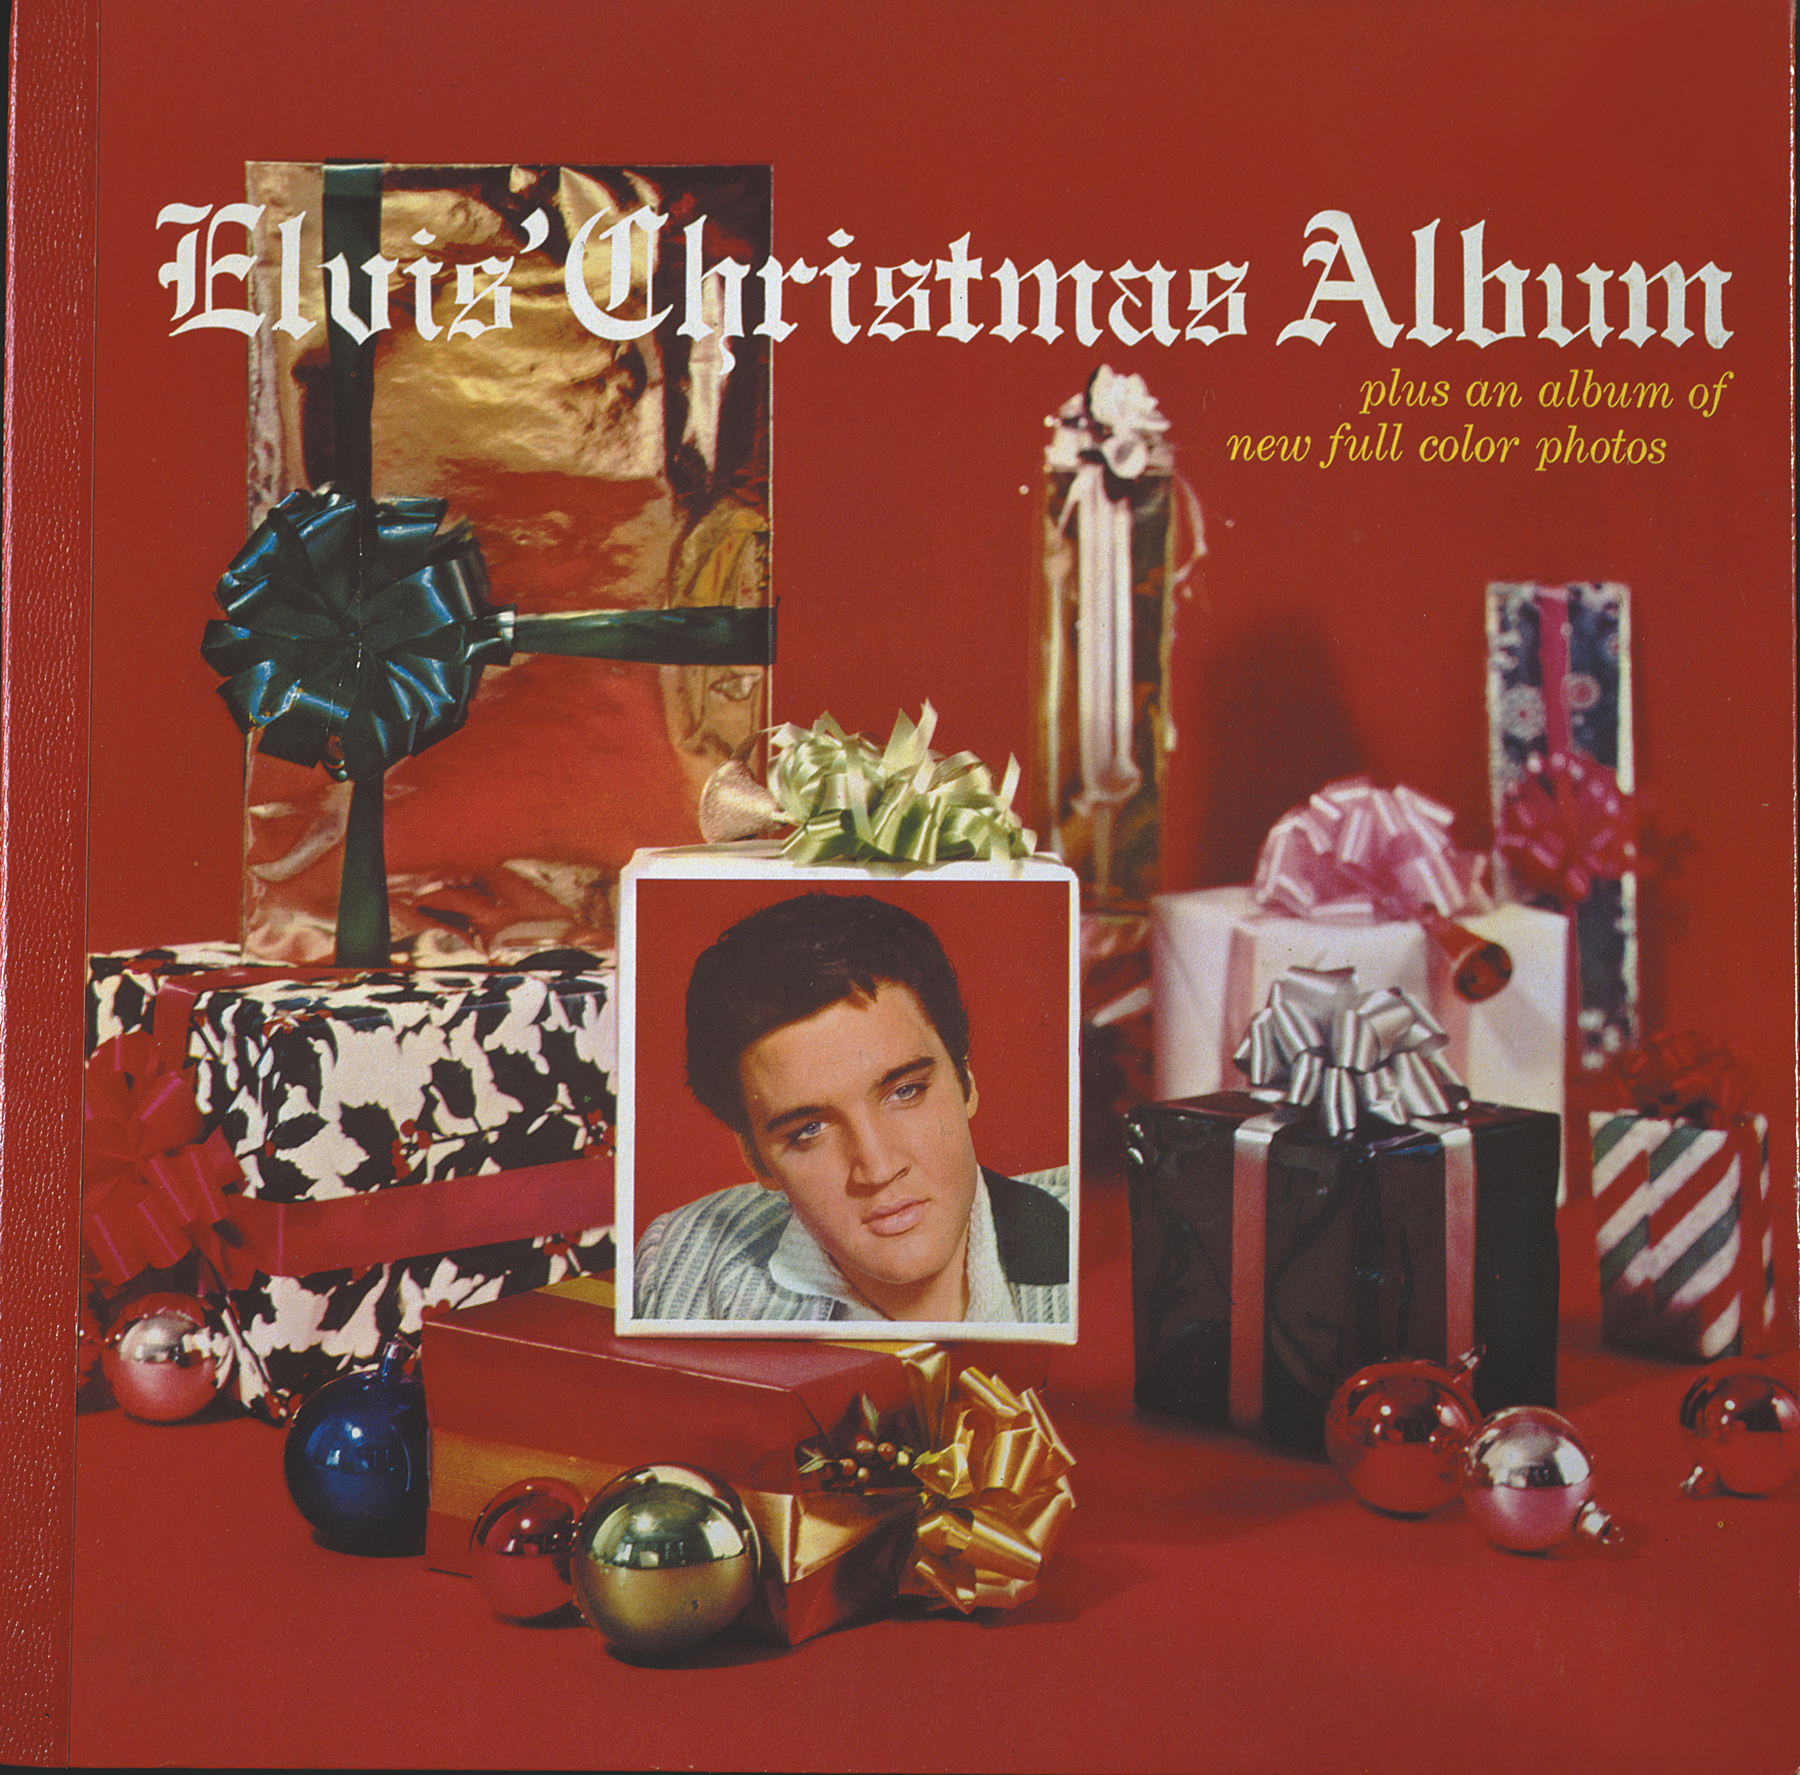 ELVIS CHRISTMAS ALBUM October 1957 E lvis first holiday record proved to be - photo 7